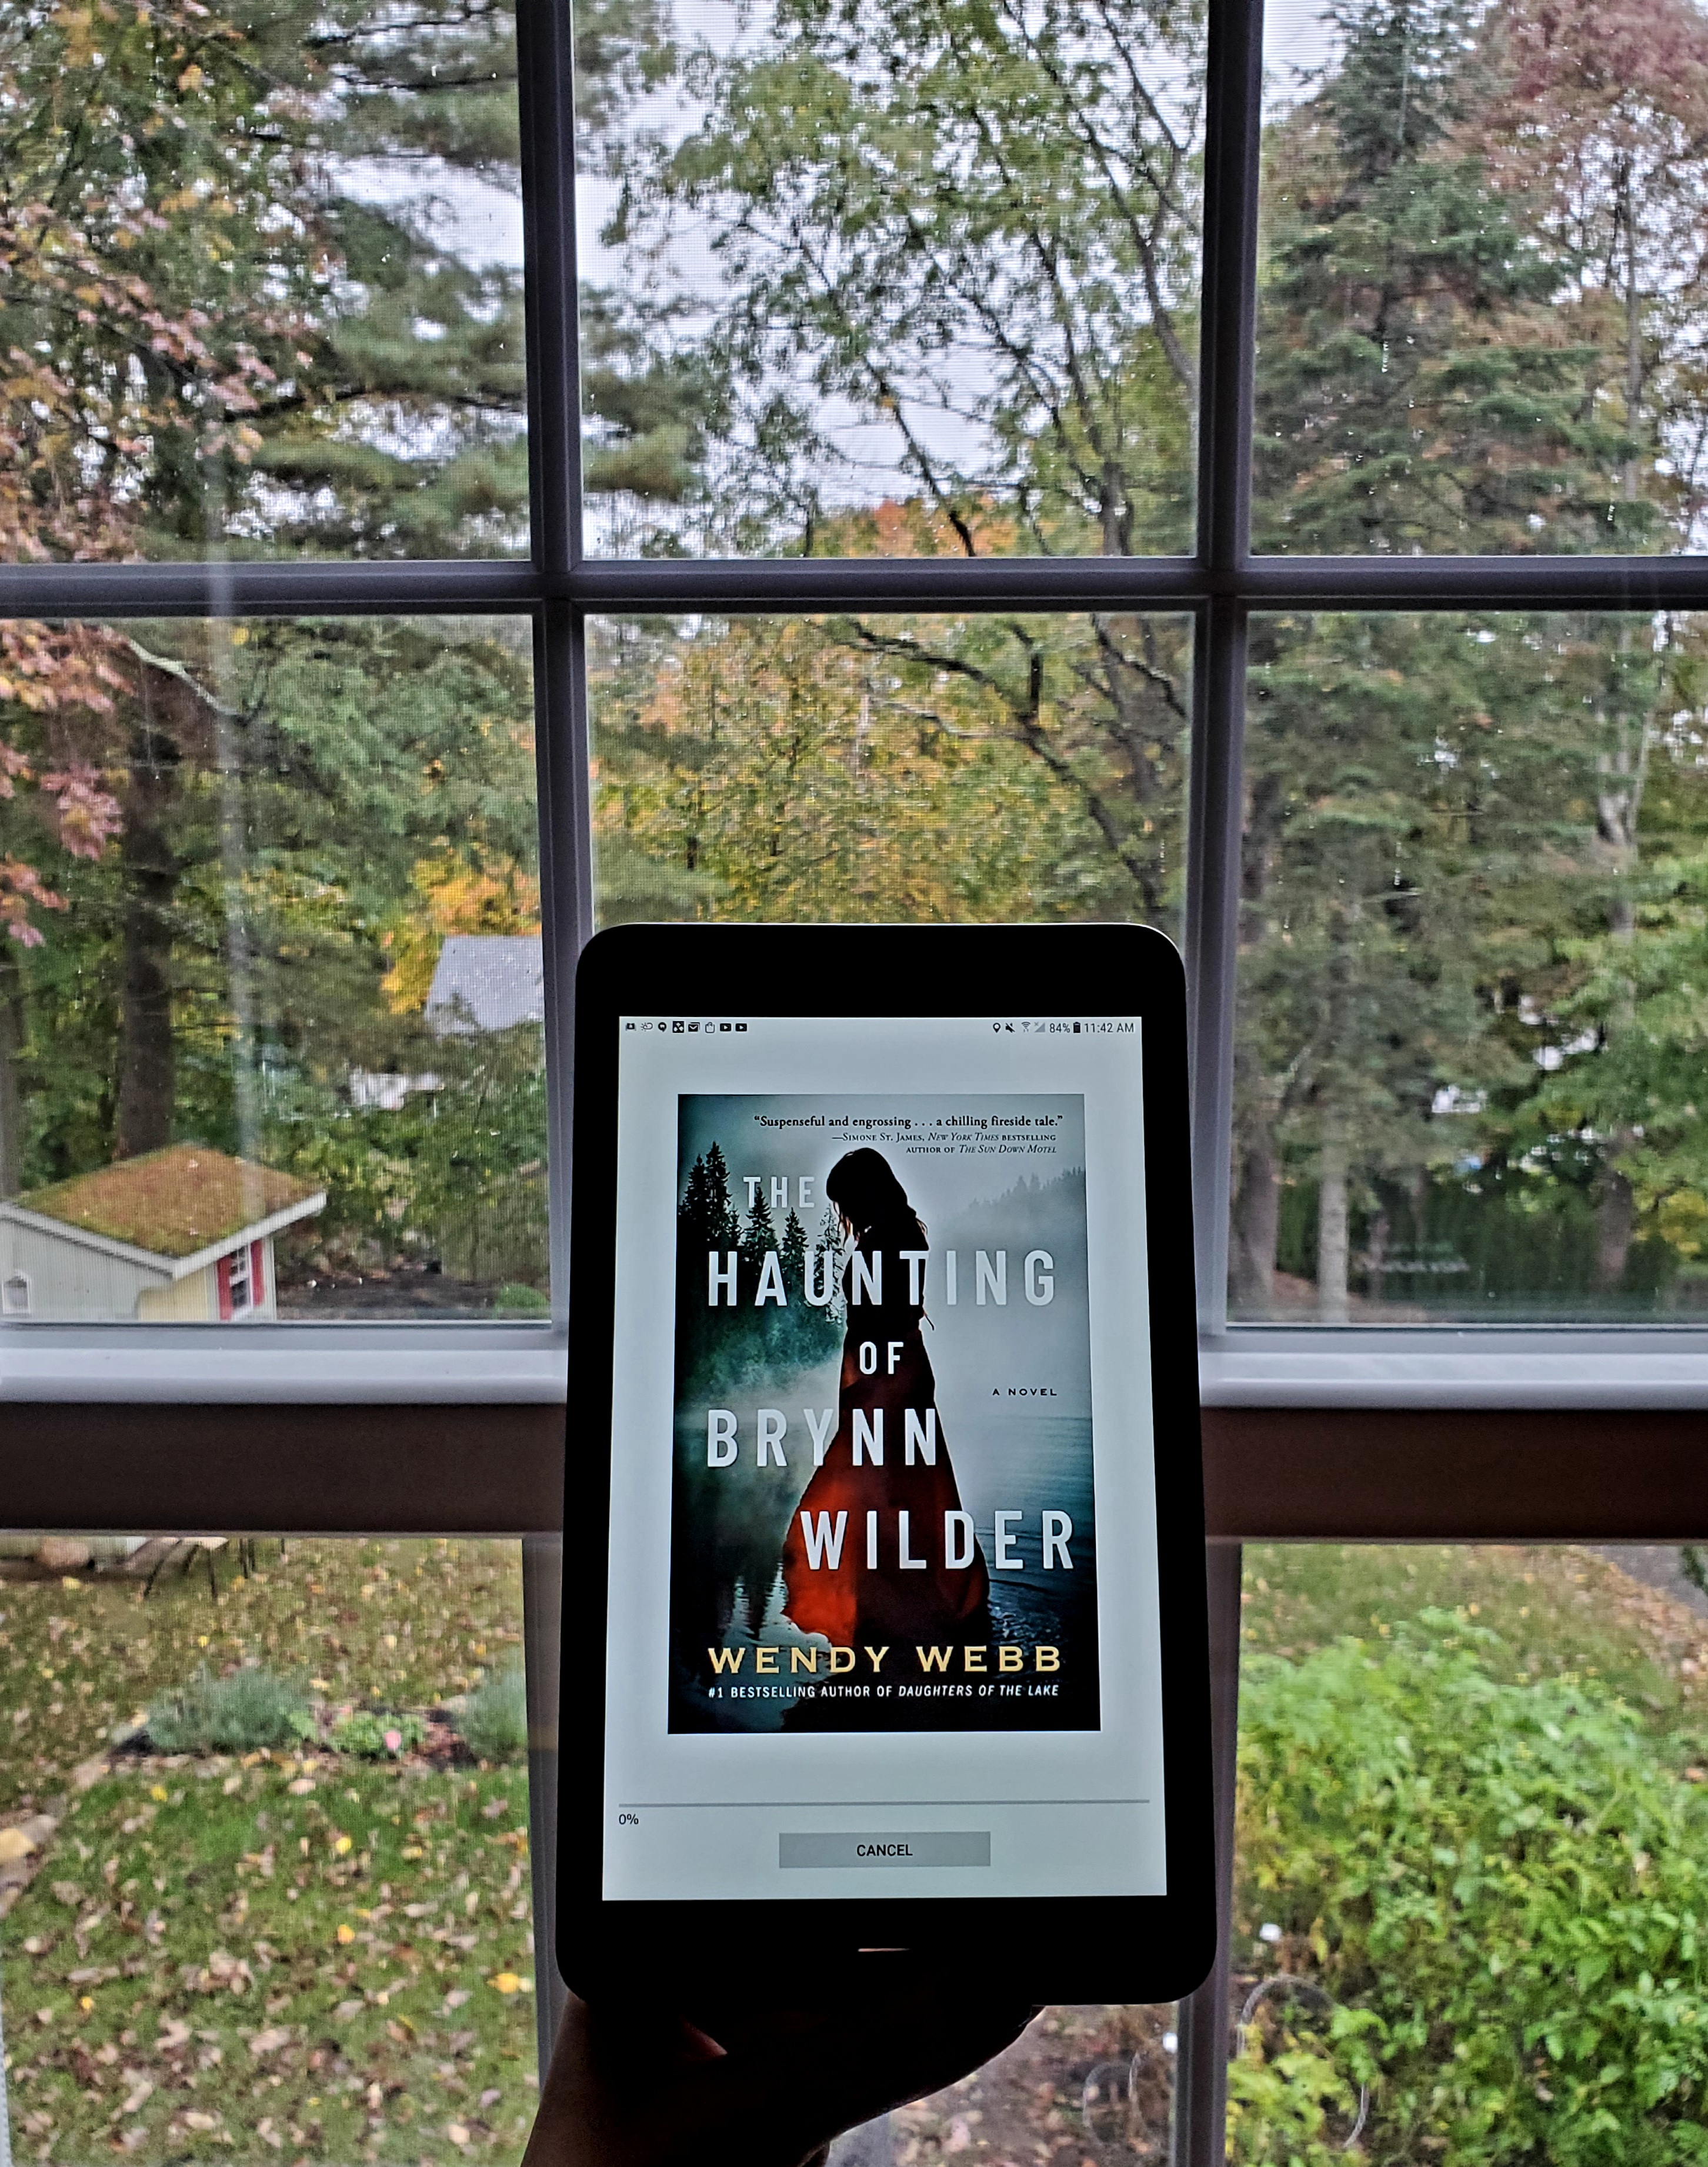 Book Review of THE HAUNTING OF BRYNN WILDER